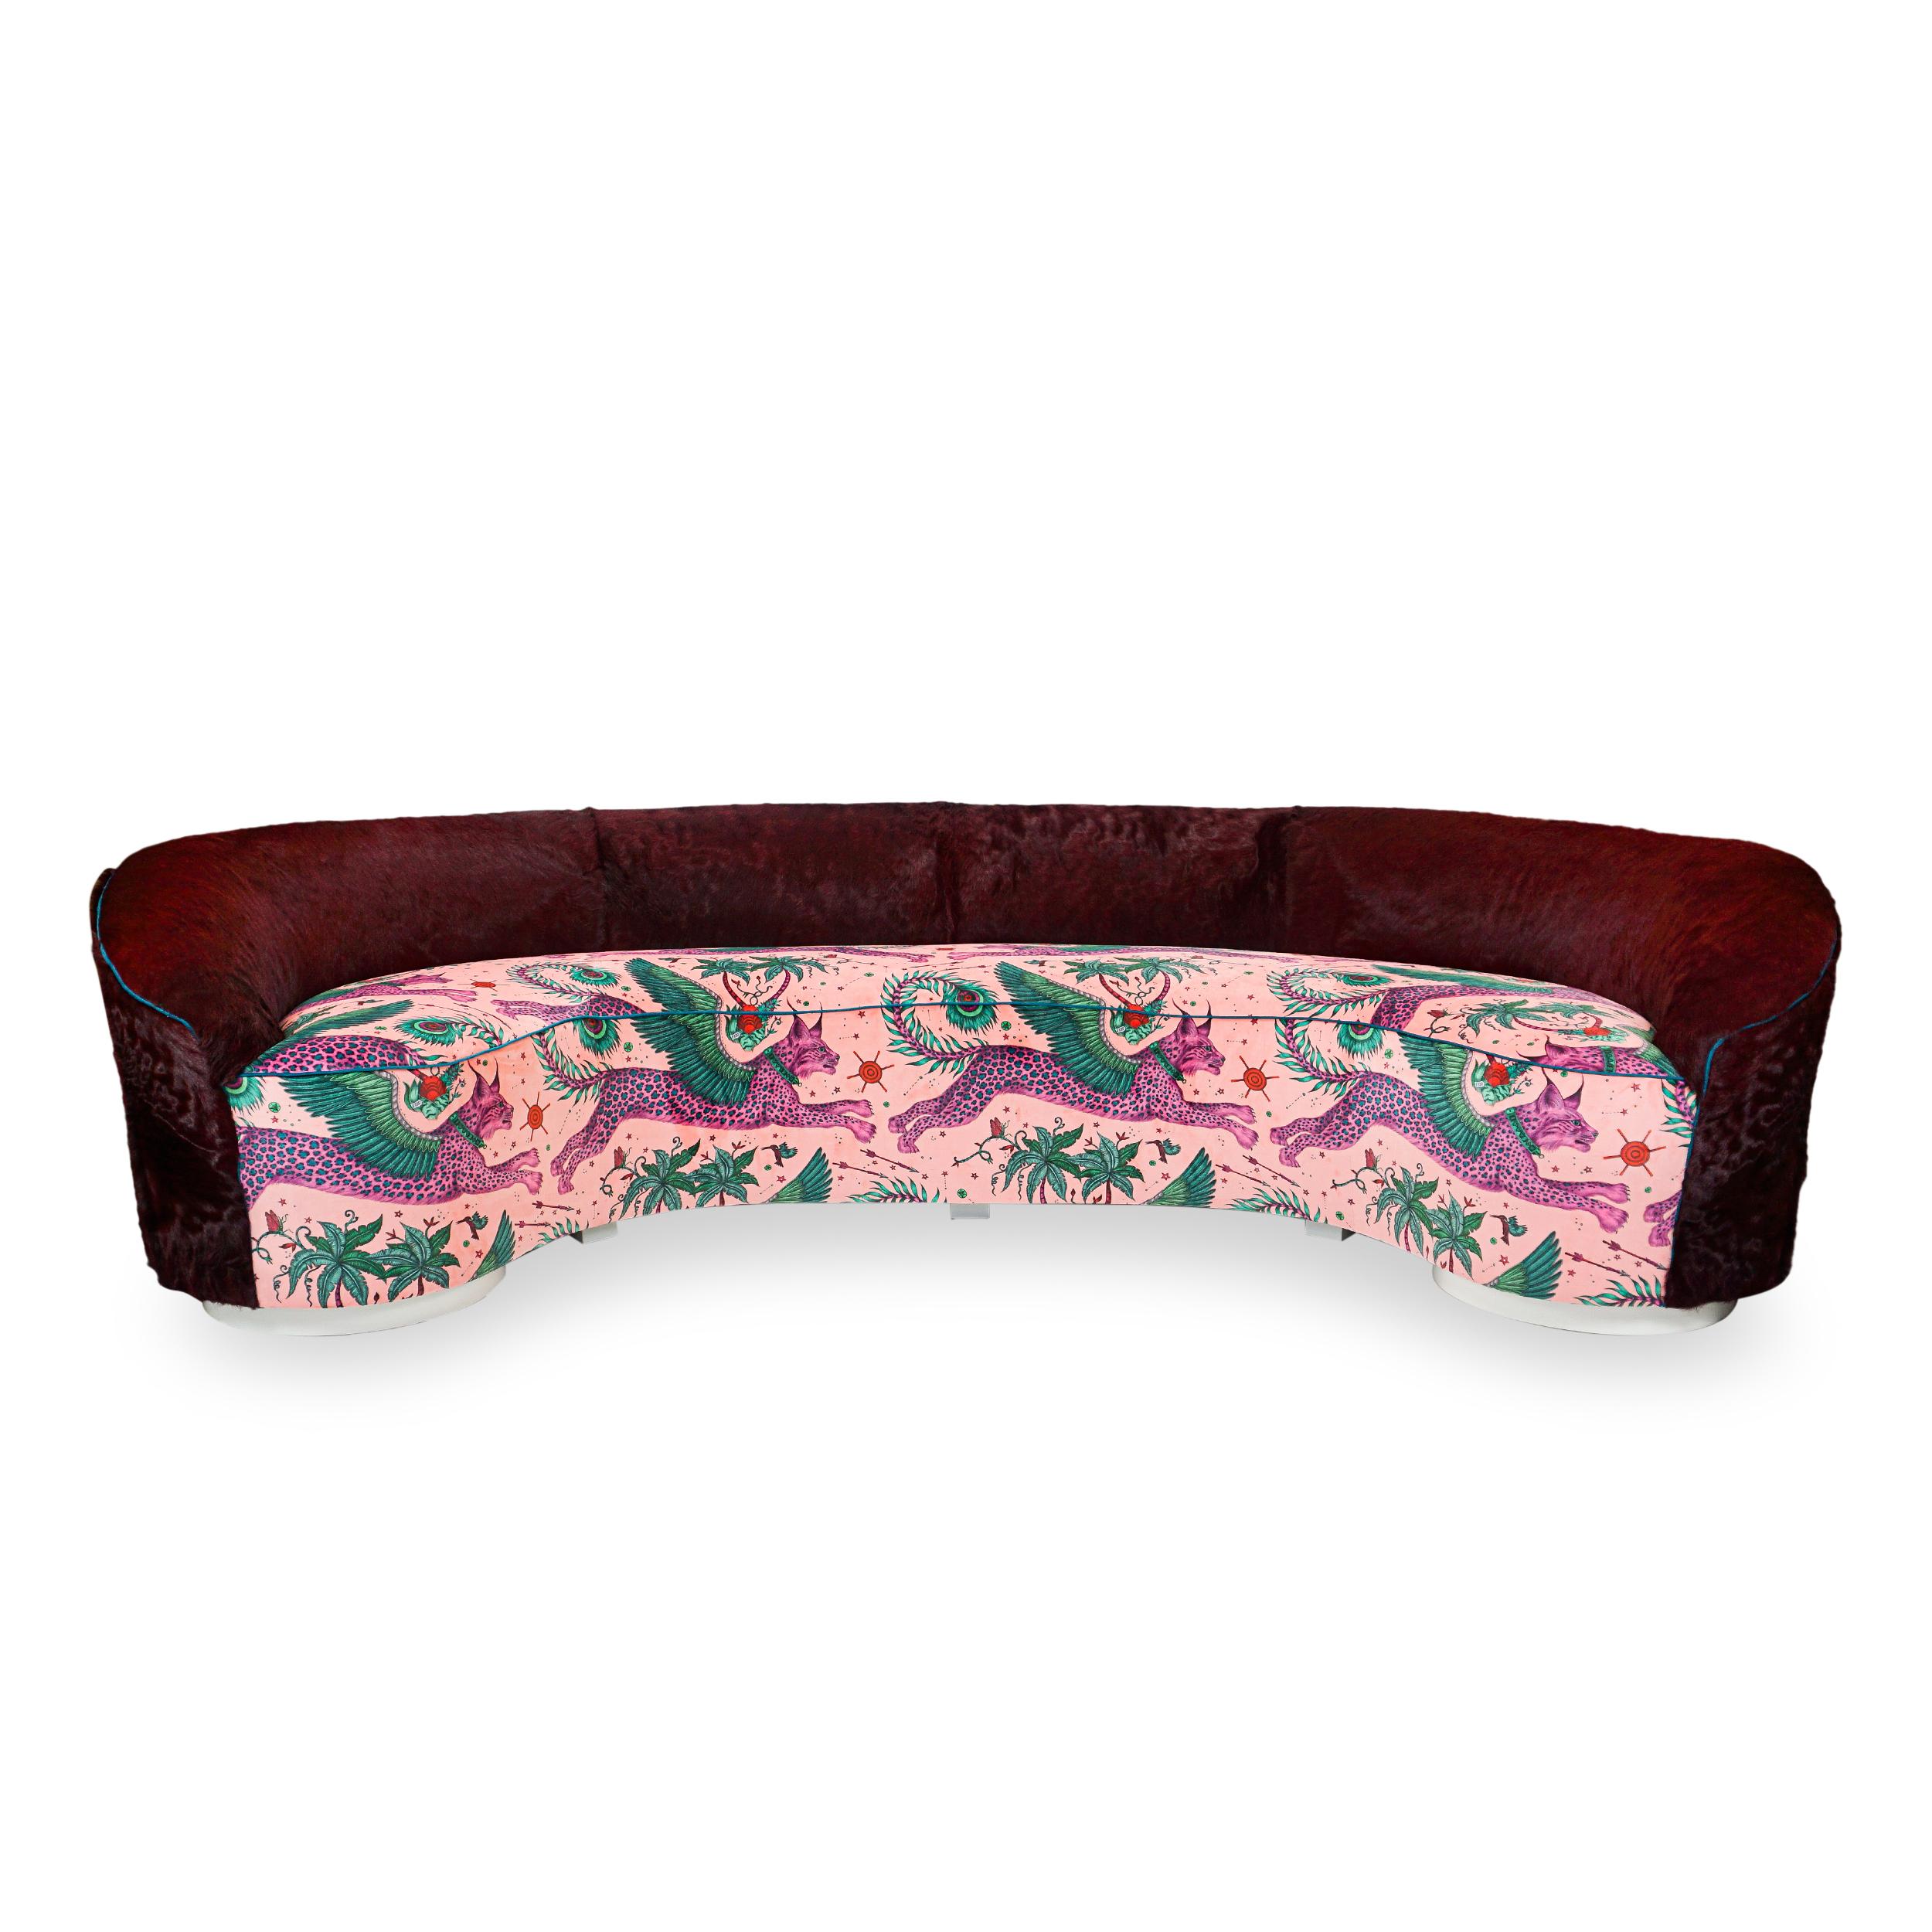 American Curved Sofa with Oxblood Cowhide and Fantastical Printed Velvet, Slope Arm For Sale